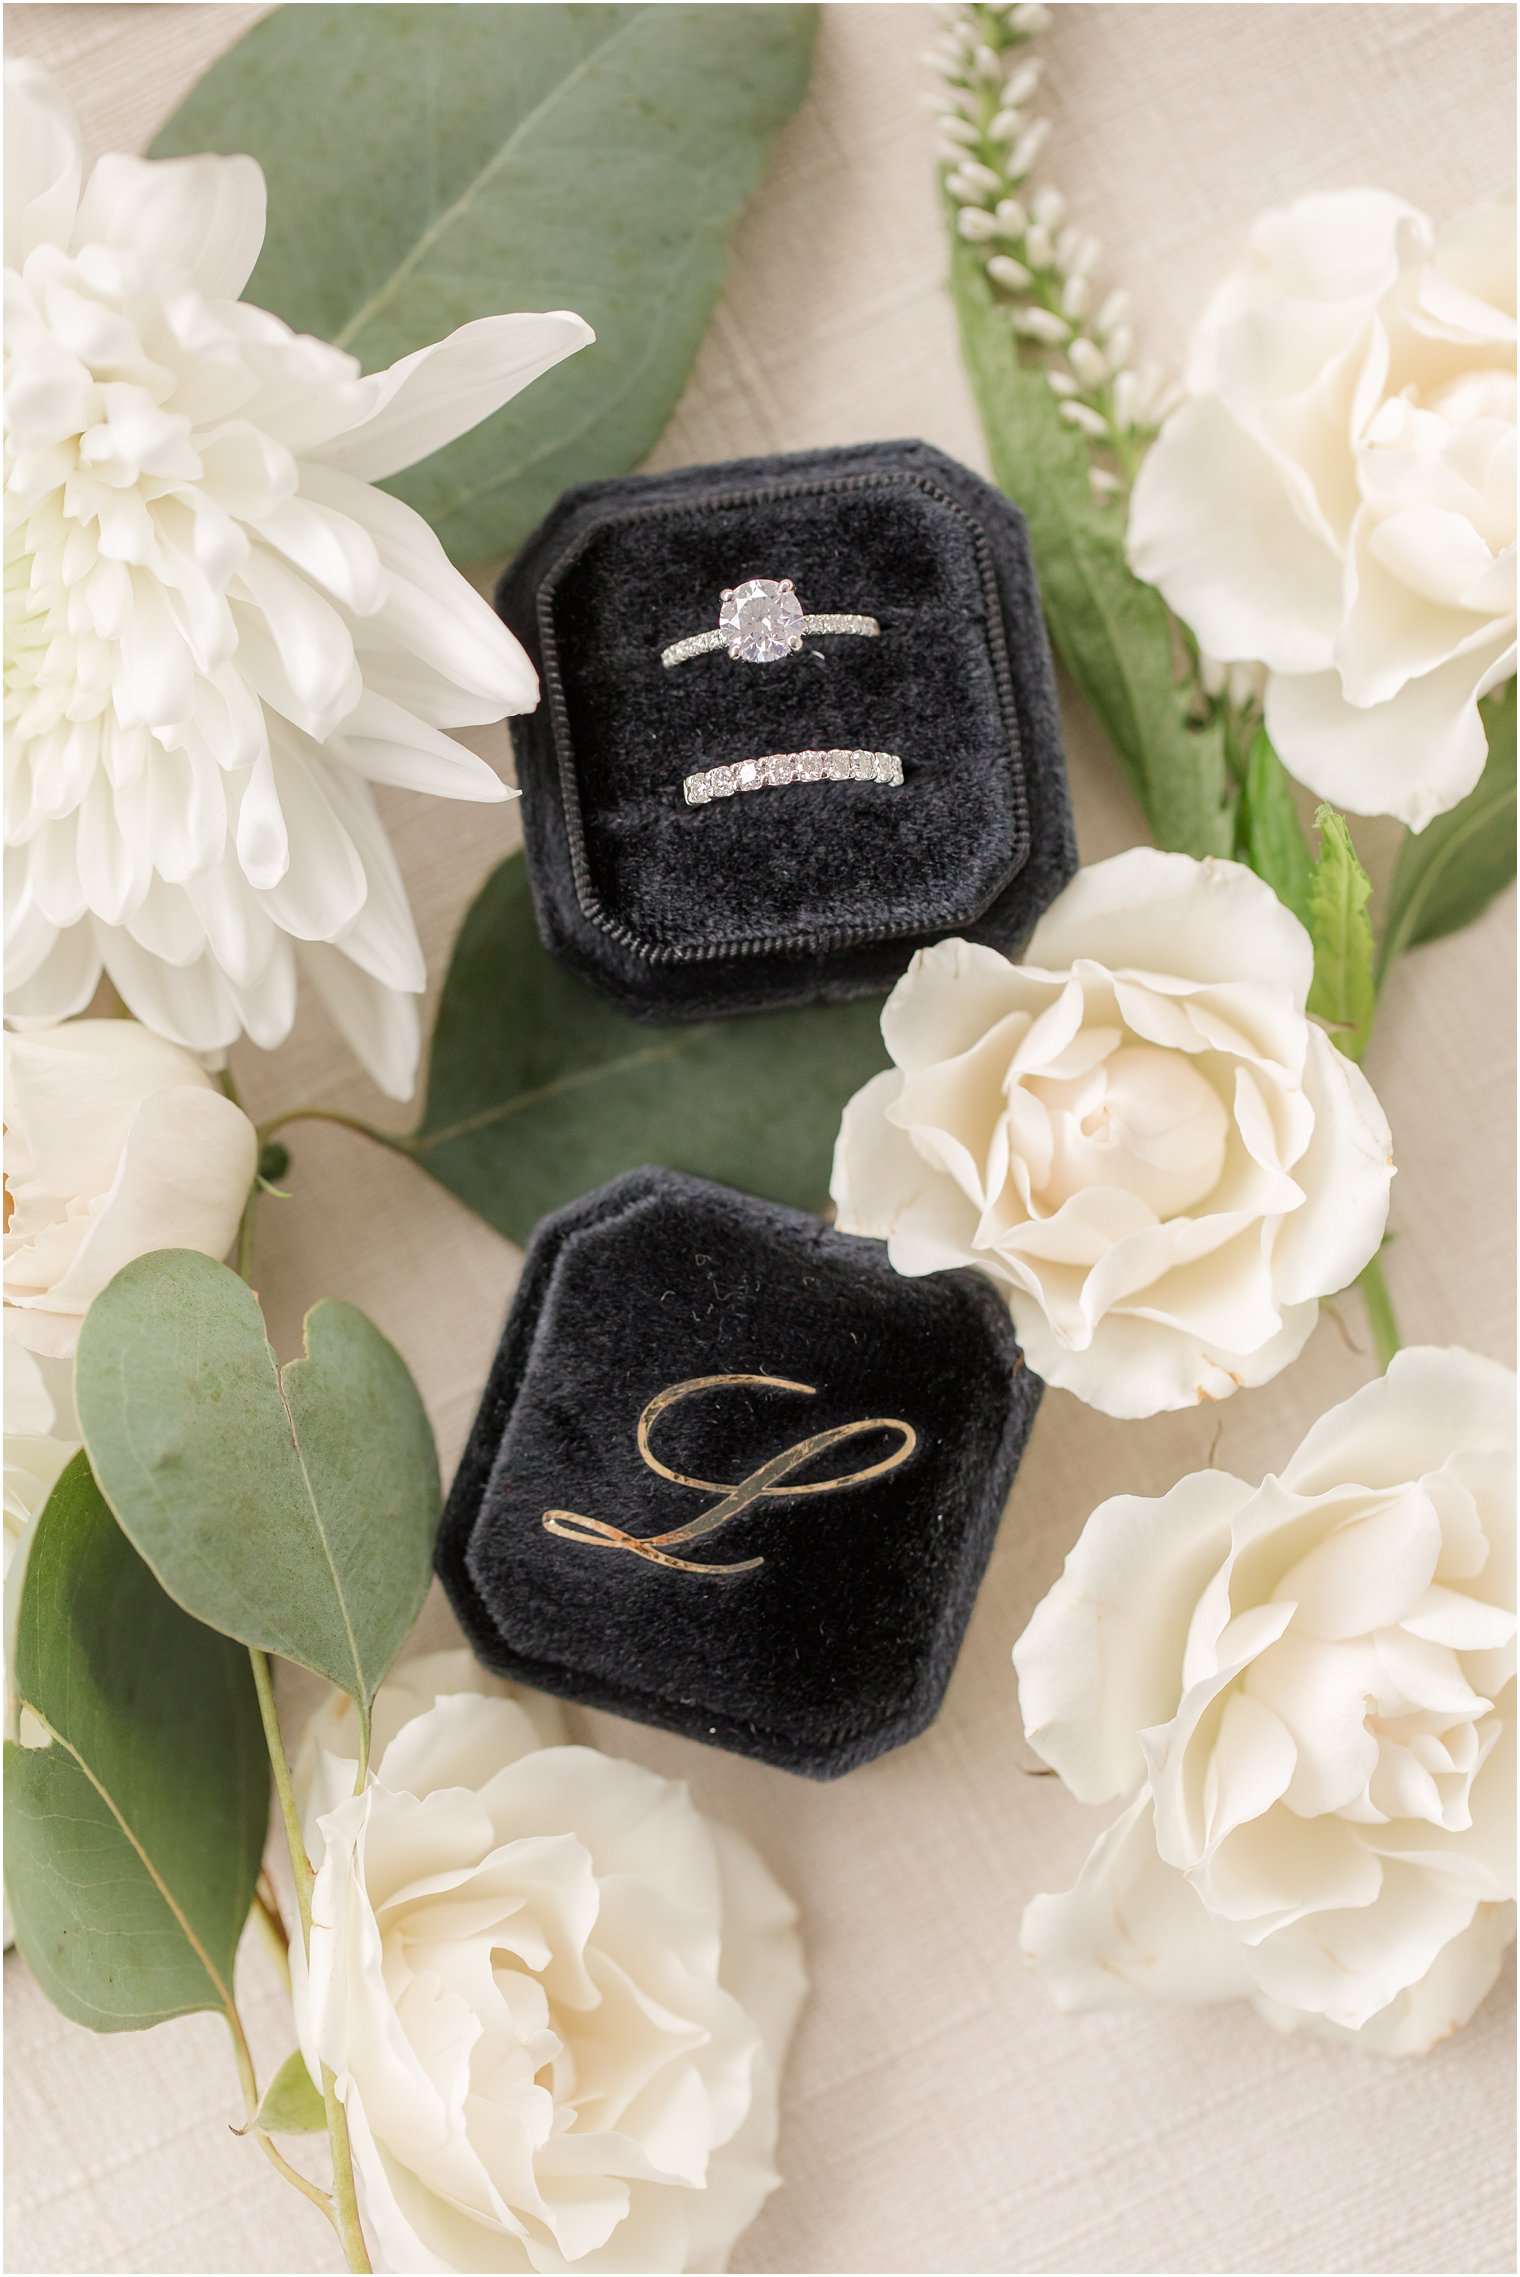 bride's rings rest in black jewelry box monogrammed with L